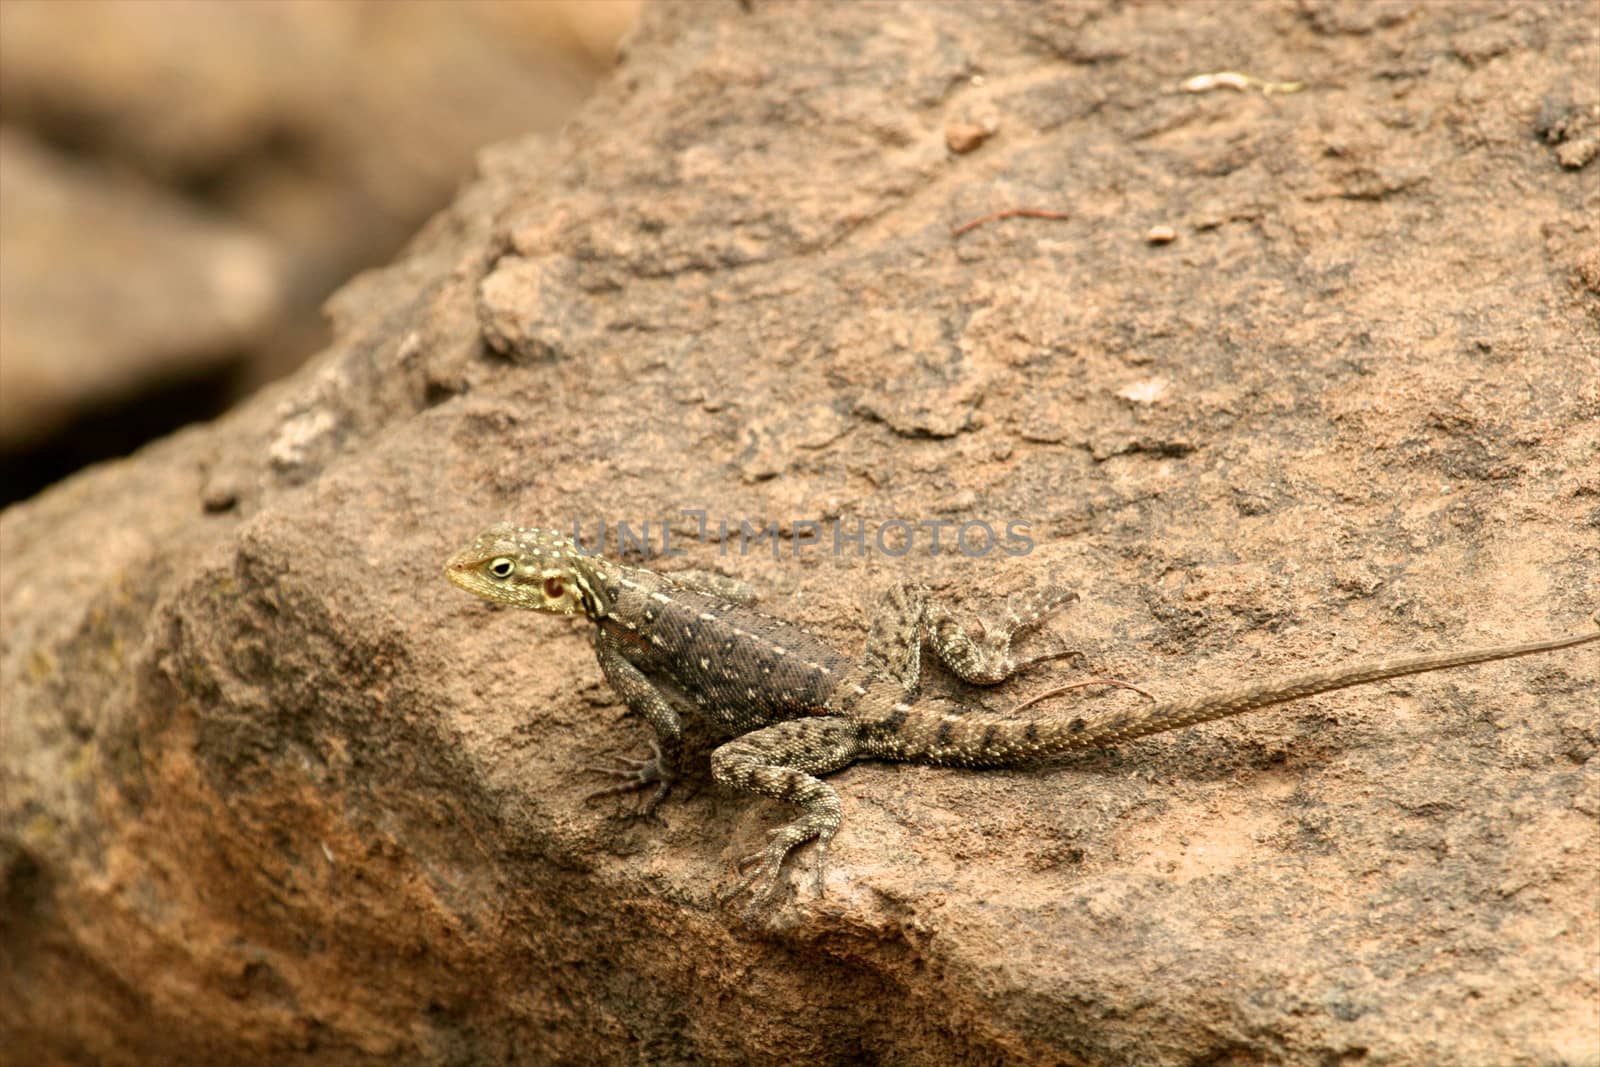 agama on the rock by moizhusein